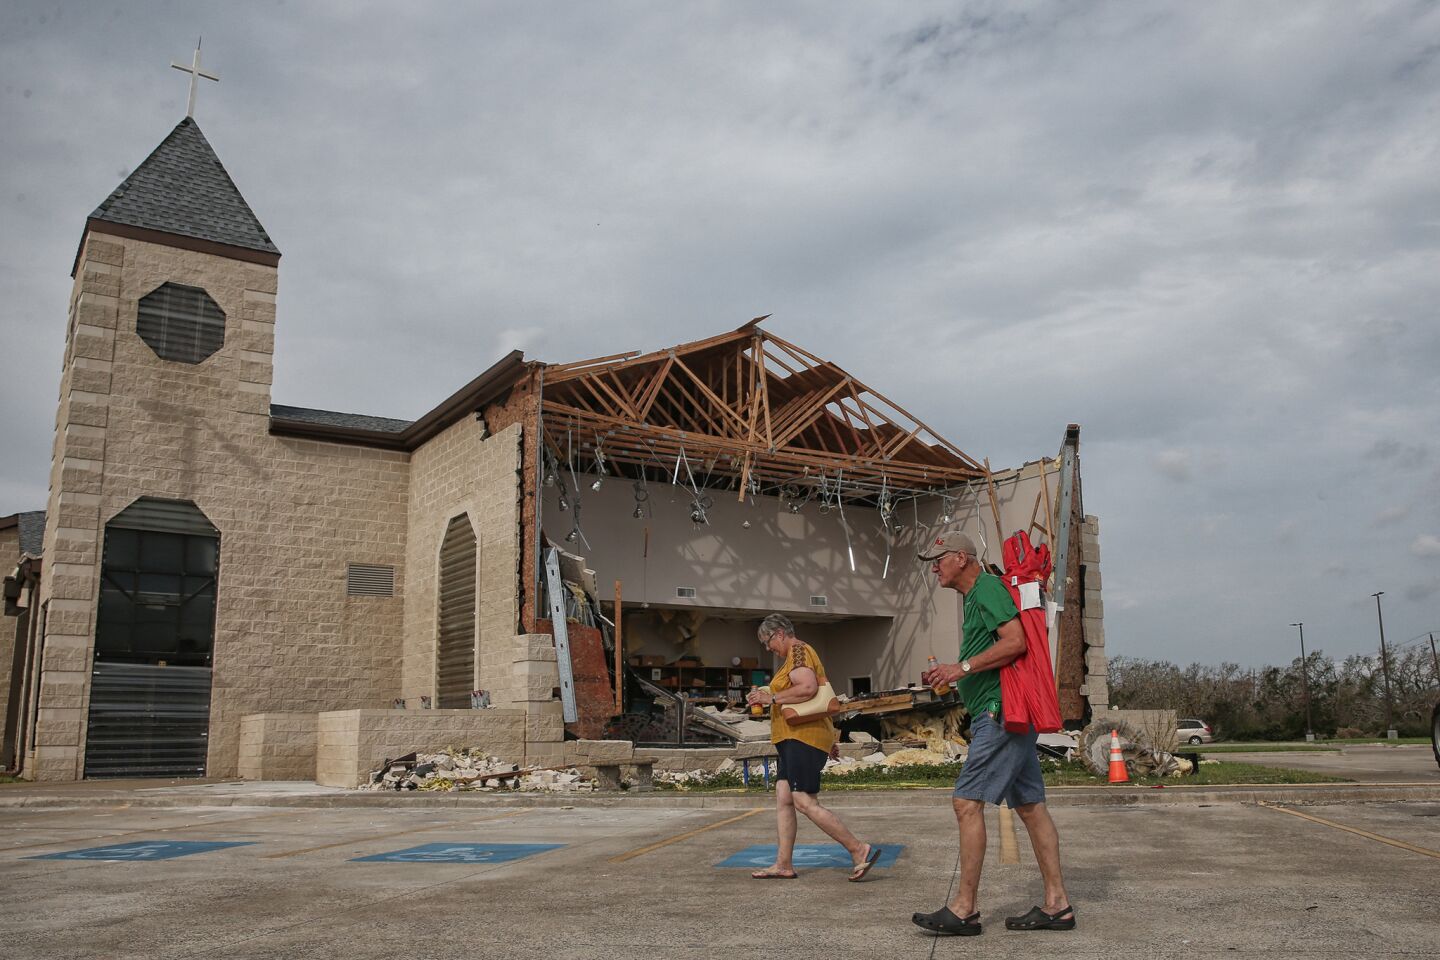 Hurricane Harvey severely damaged the First Baptist Church in Rockport, Texas. Worshipers on Sunday brought their own chairs to take part in an outdoor service.